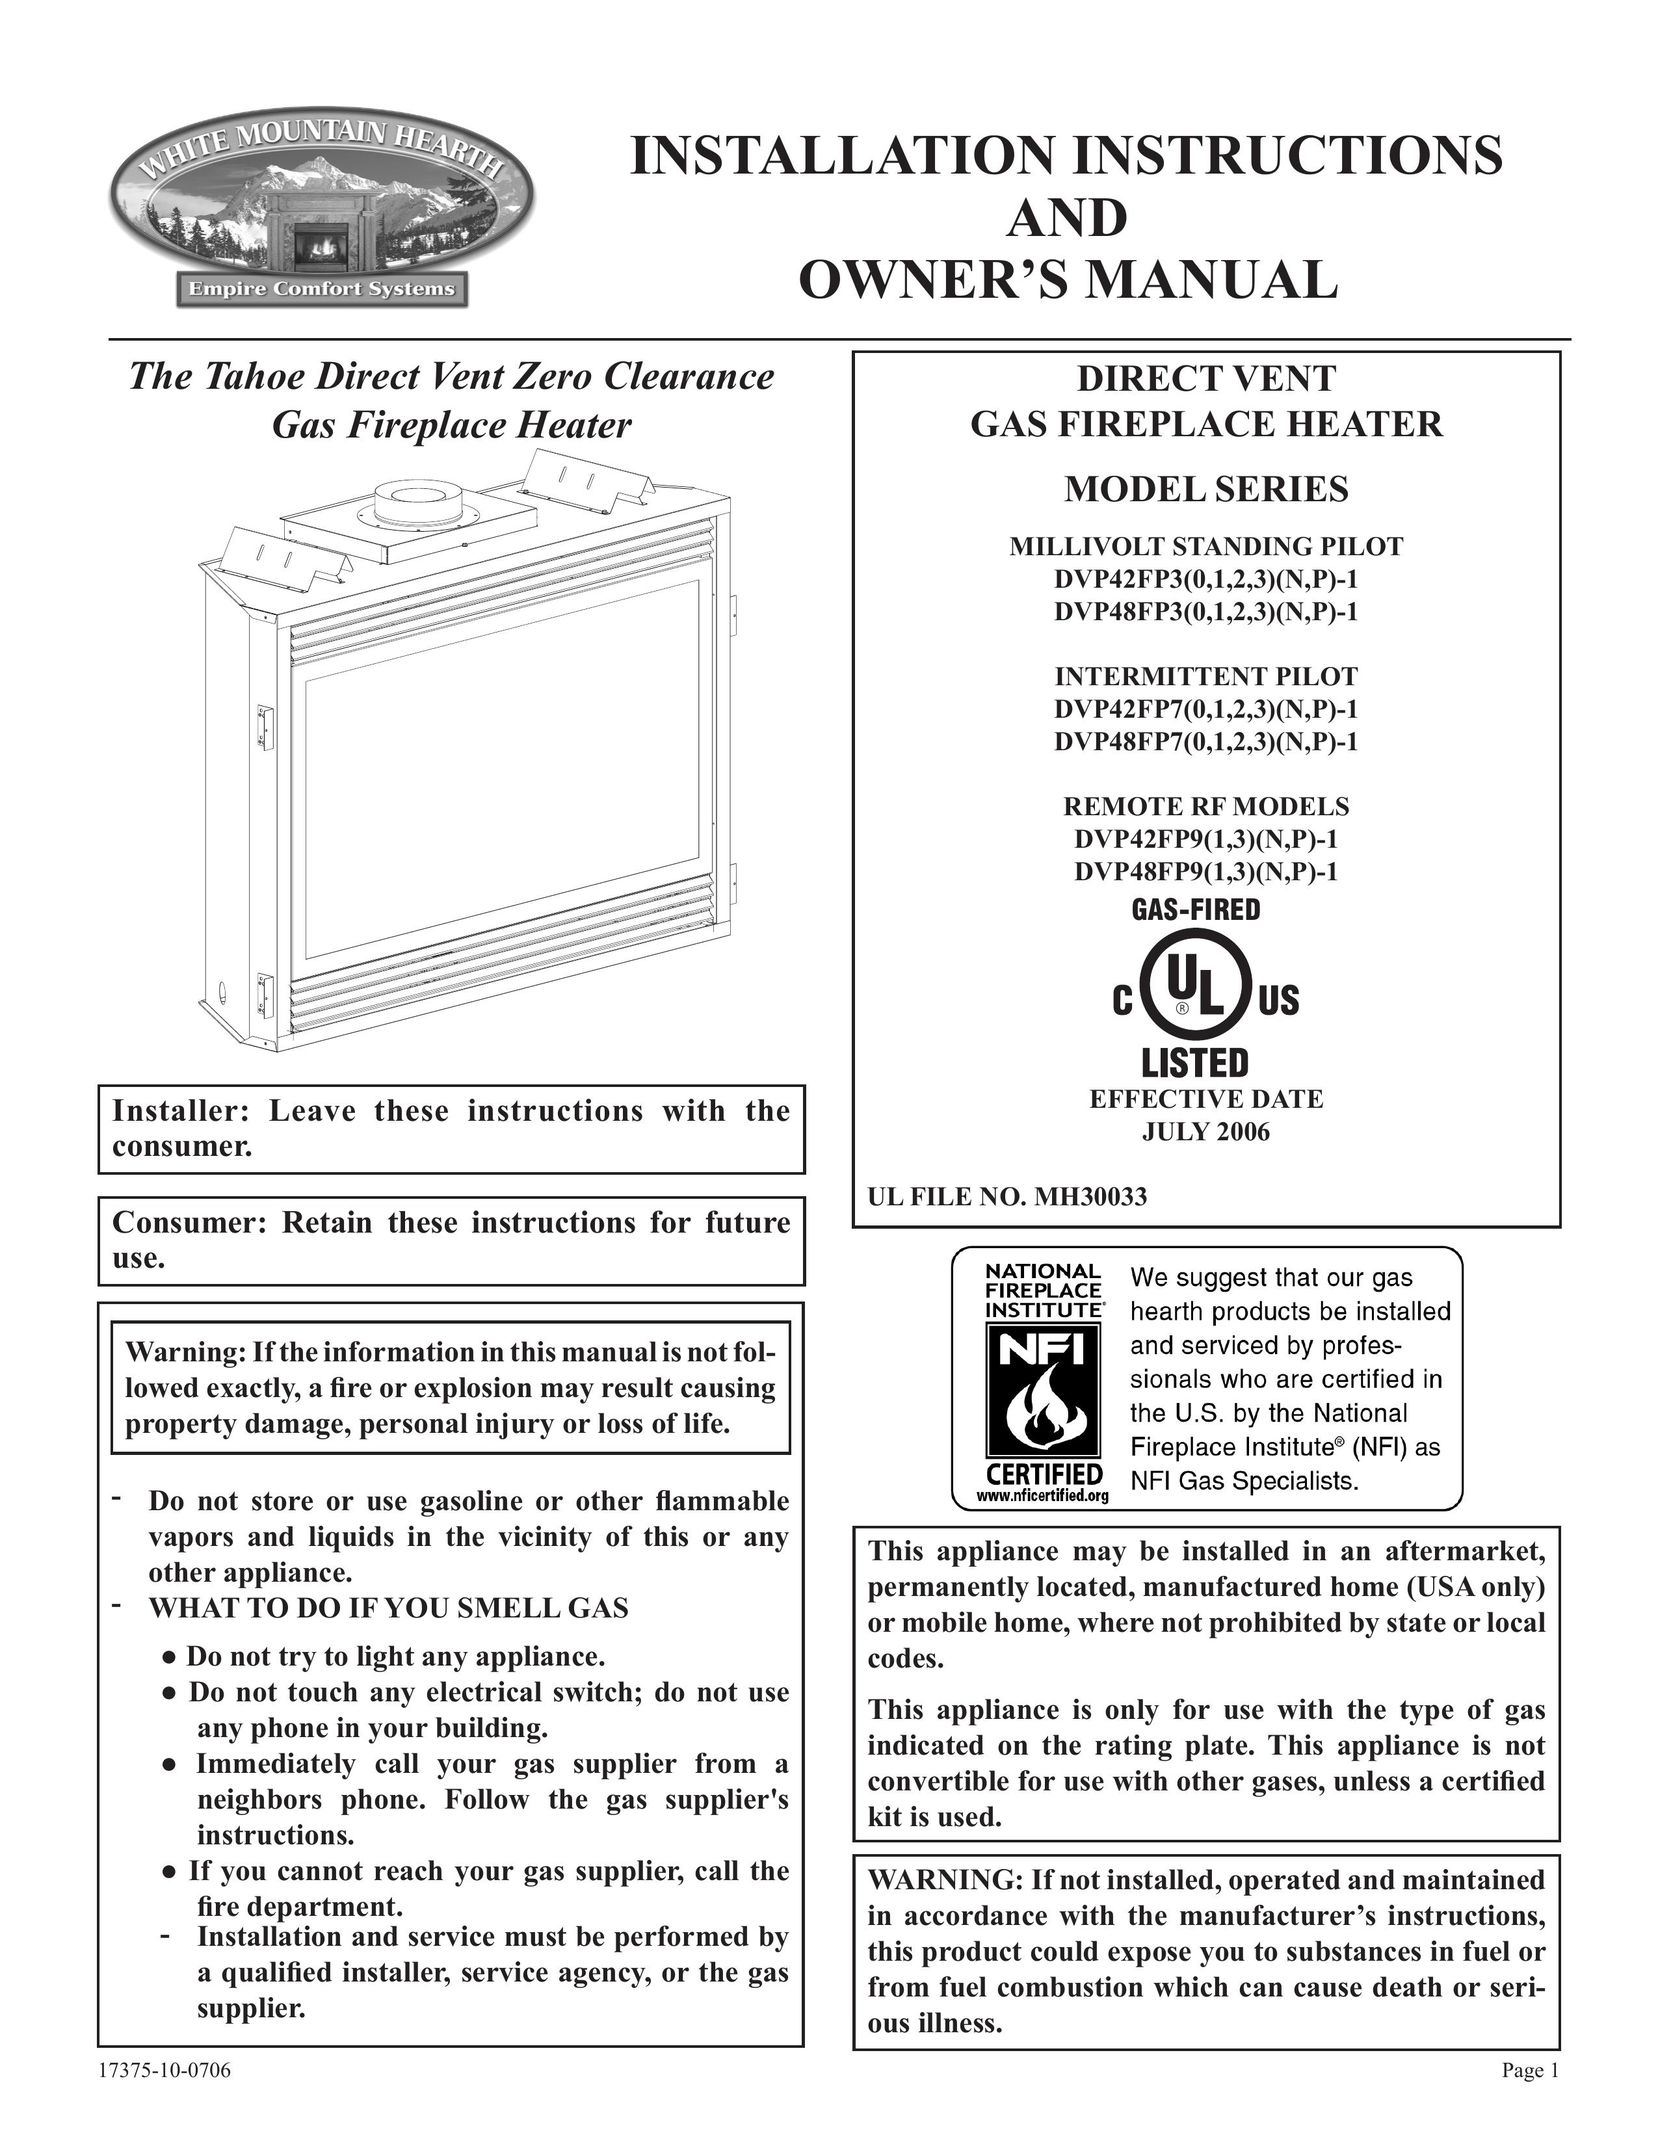 Empire Comfort Systems DVP48FP7(0,1,2,3)(N,P)-1 Indoor Fireplace User Manual